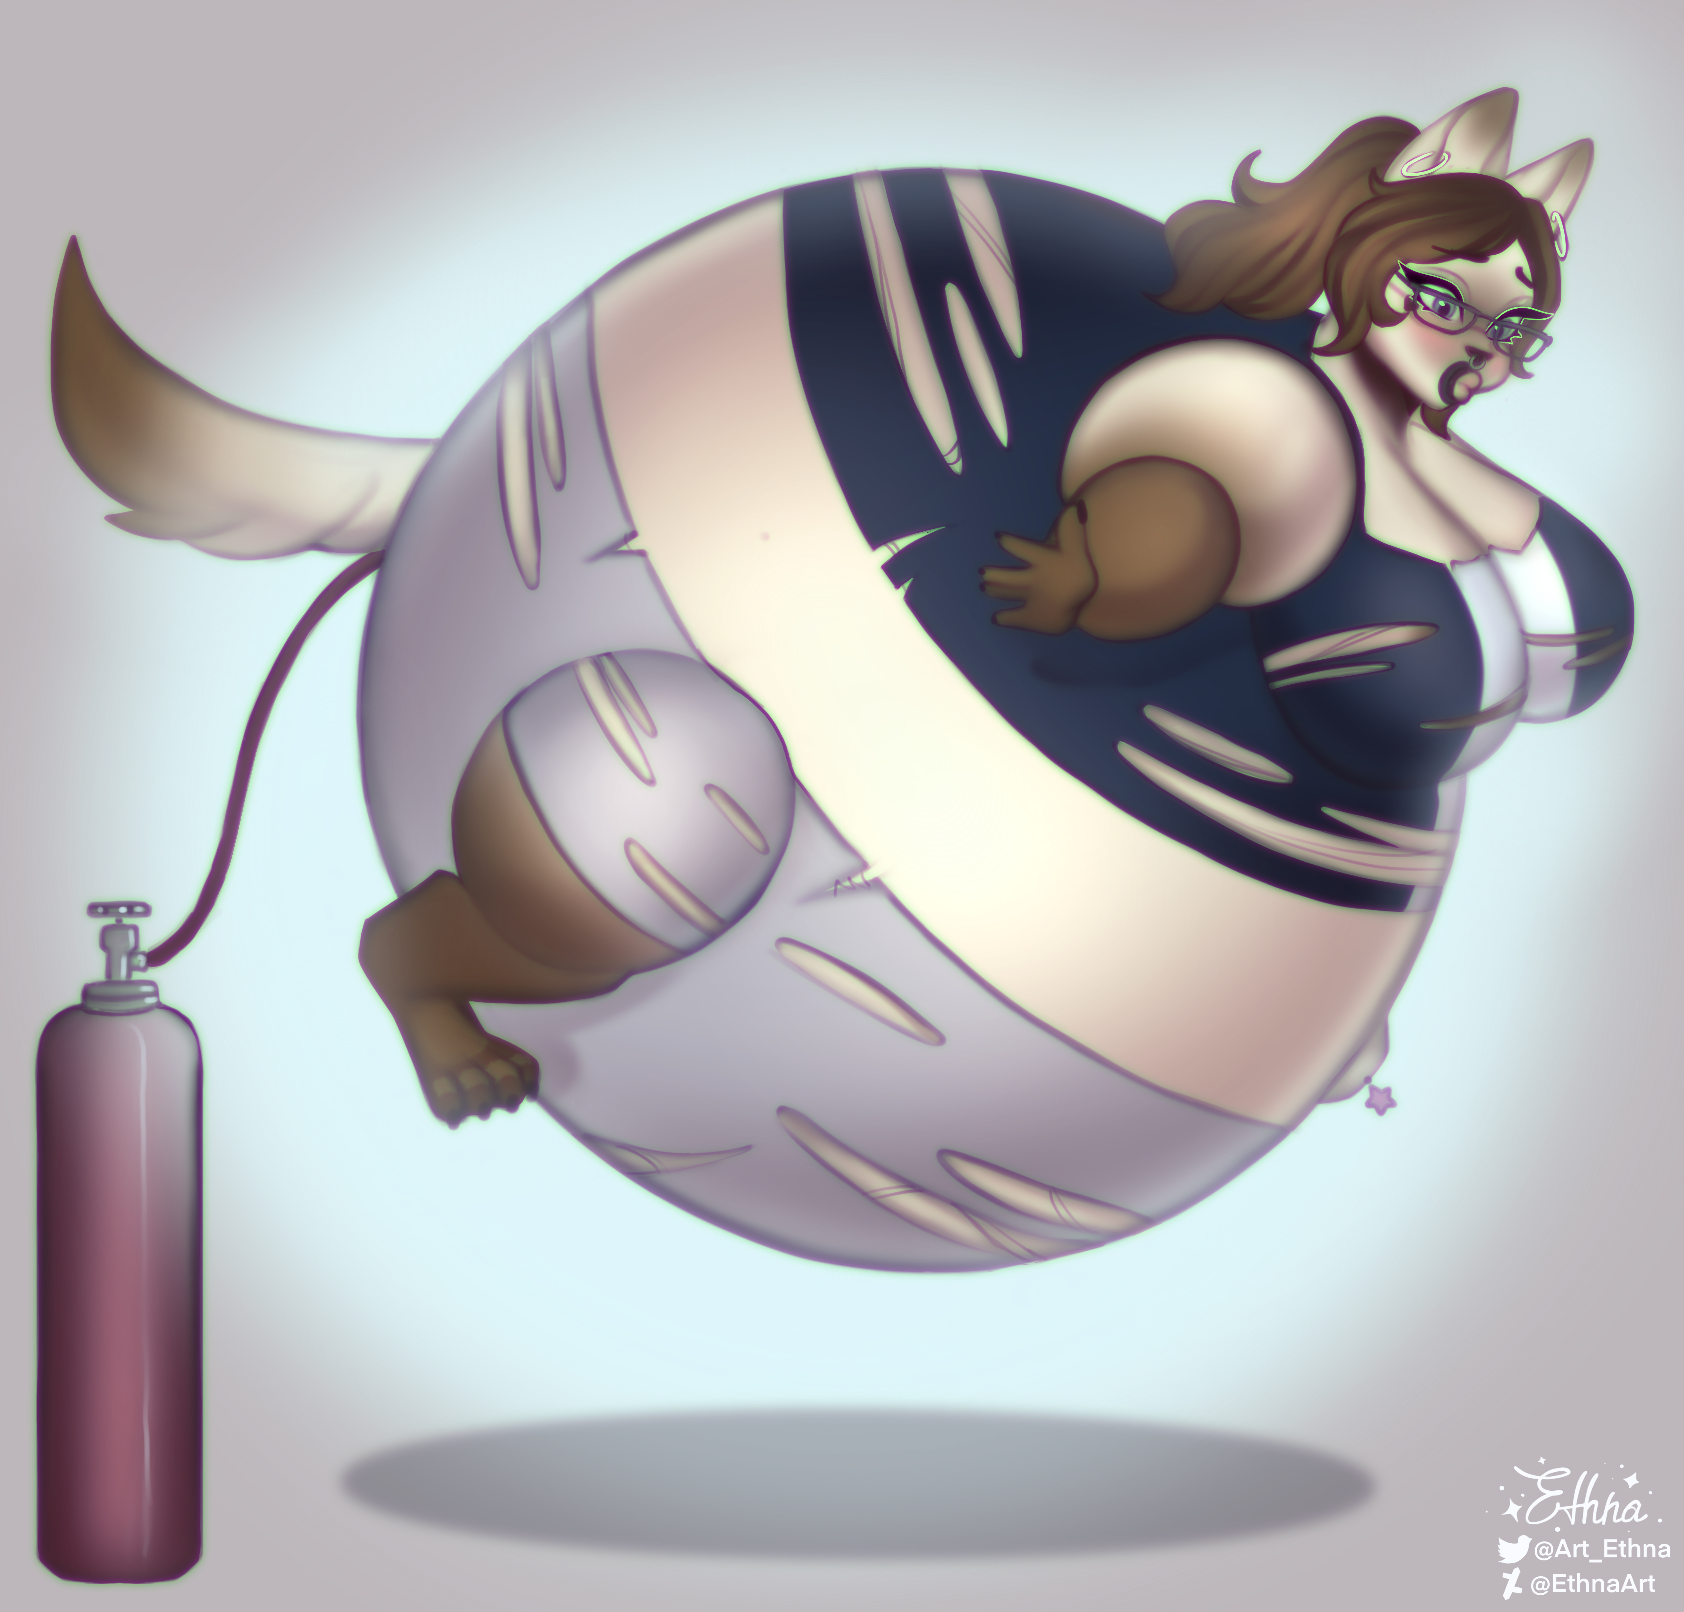 Female furry inflation